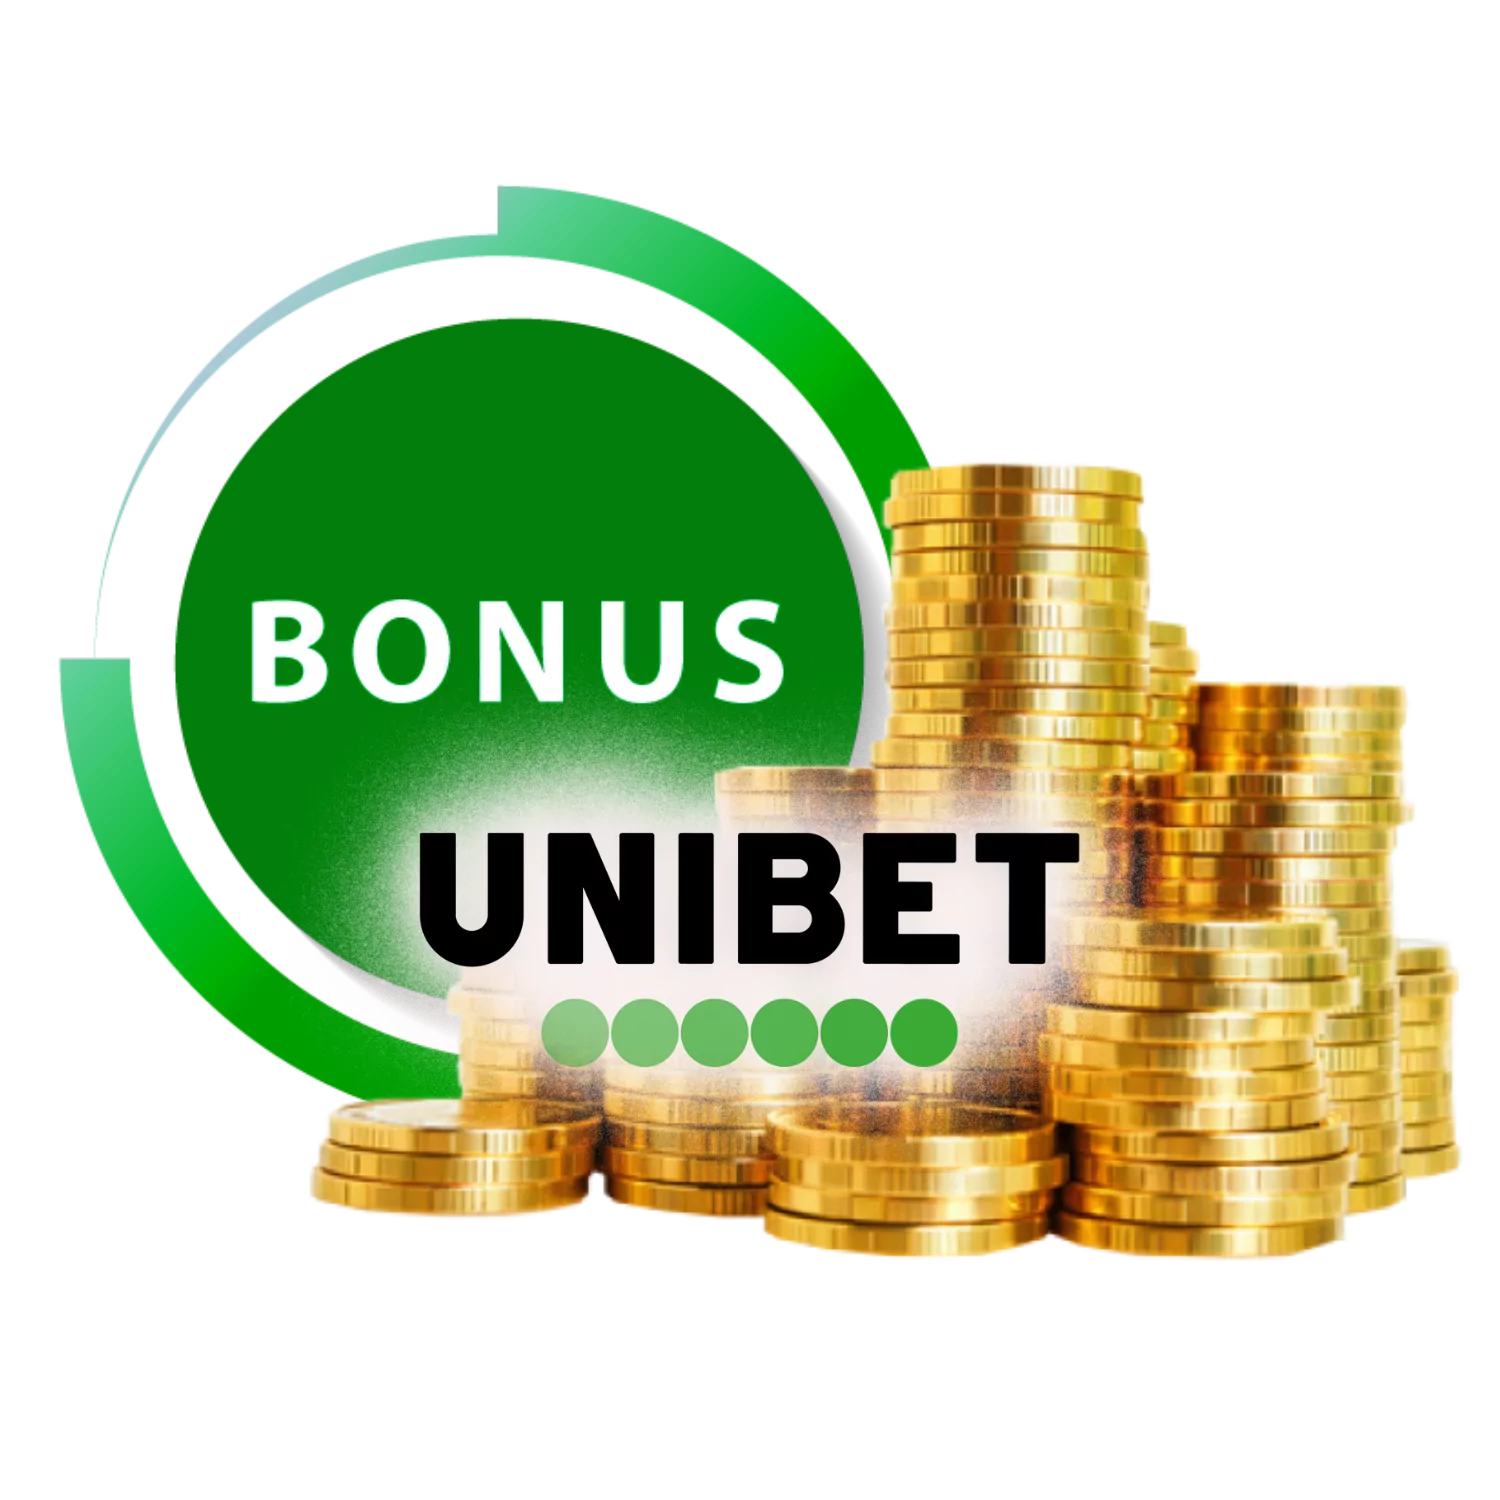 Get Unibet bonus for the first deposit and place bets on cricket.